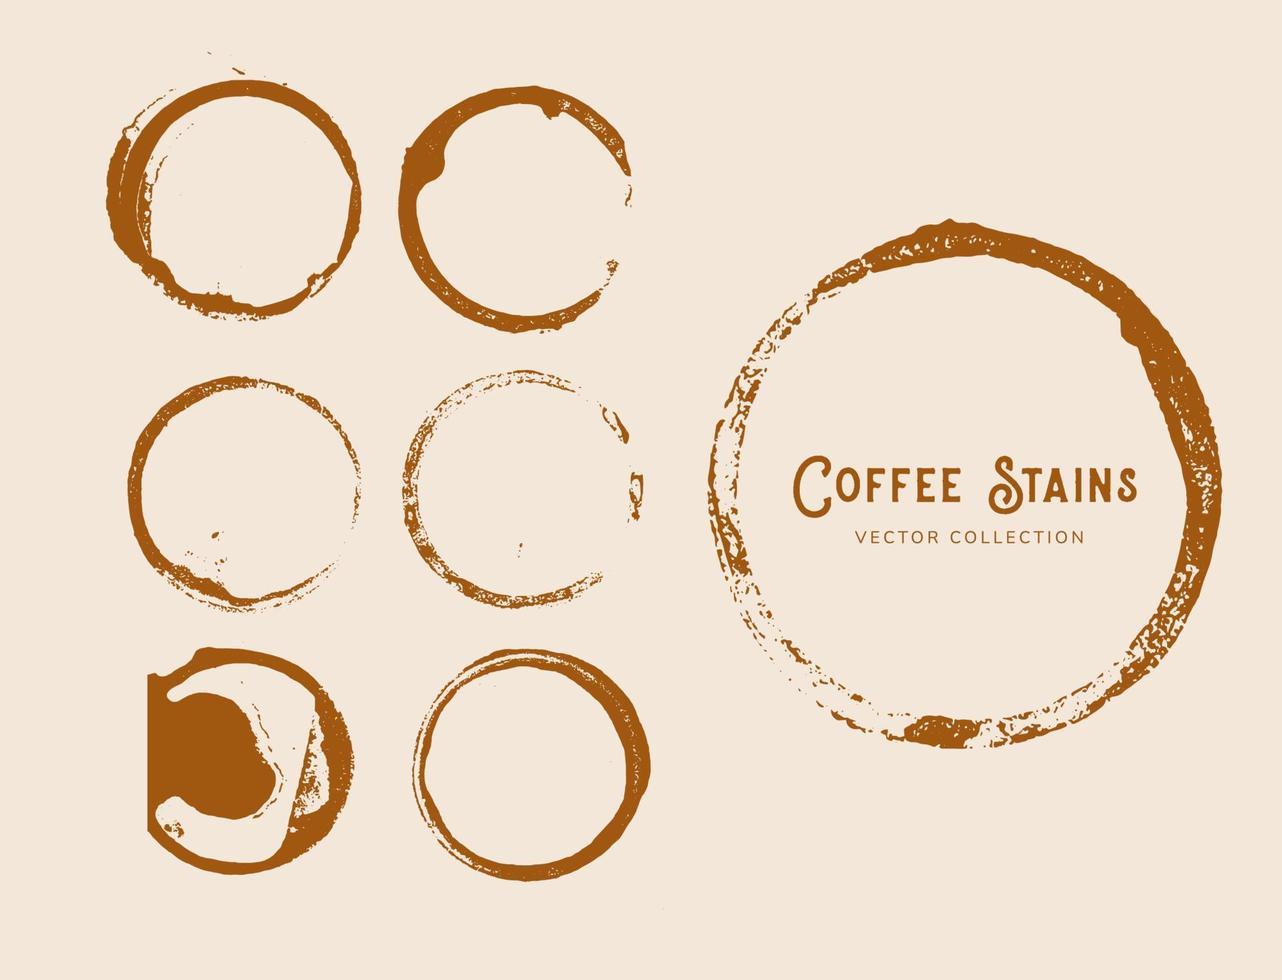 trace of Coffee mug stain in circle shape vector collection set